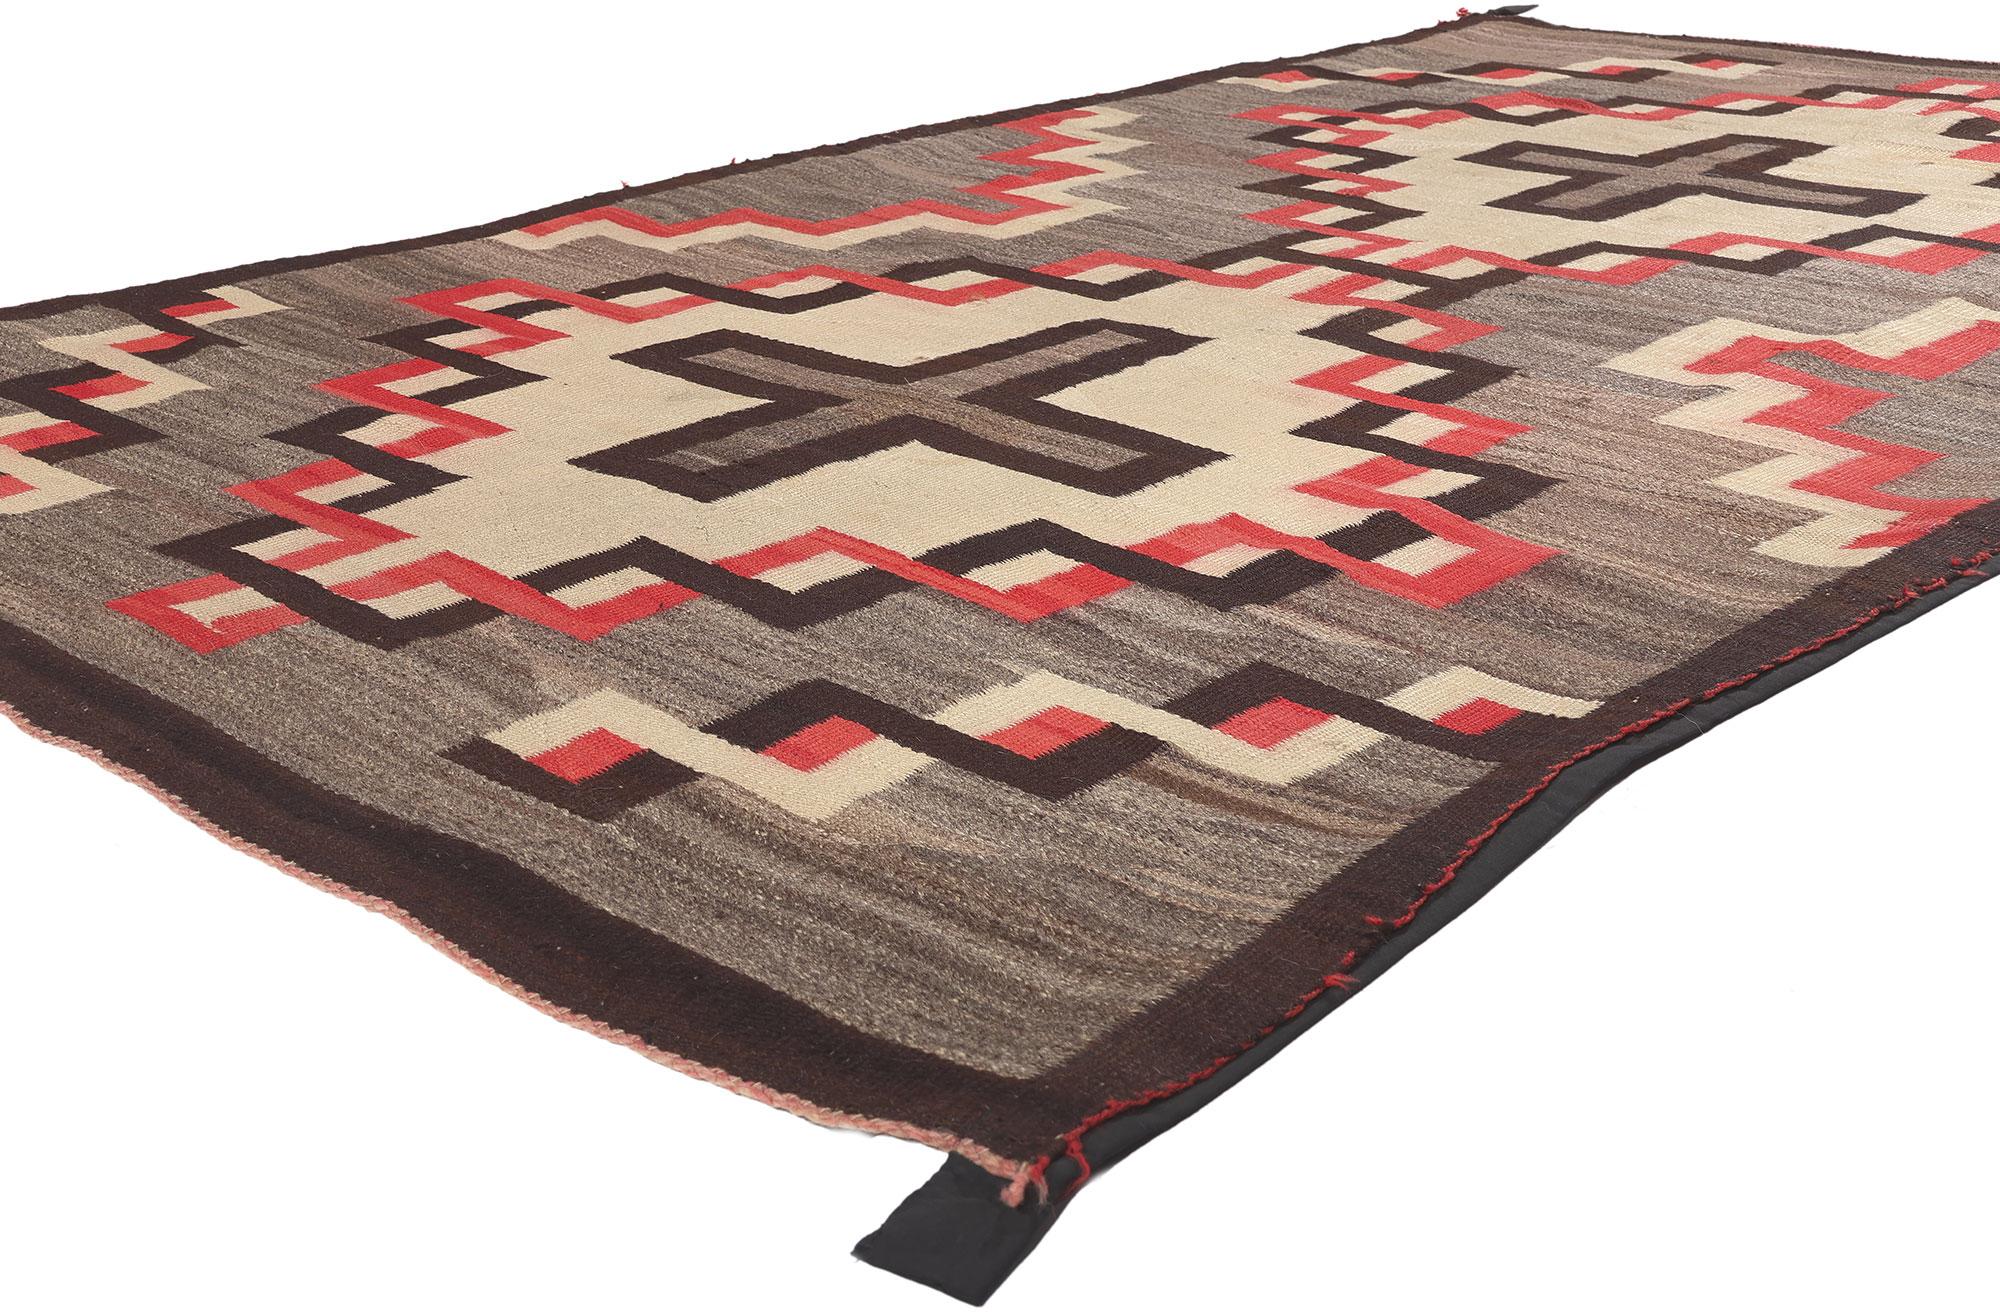 78563 Antique Ganado Navajo Rug, 05'06 x 09'03. 
Emanating Native American design with incredible detail and texture, this handwoven antique Navajo Ganado rug is a captivating vision of woven beauty. The eye-catching geometric pattern and earthy